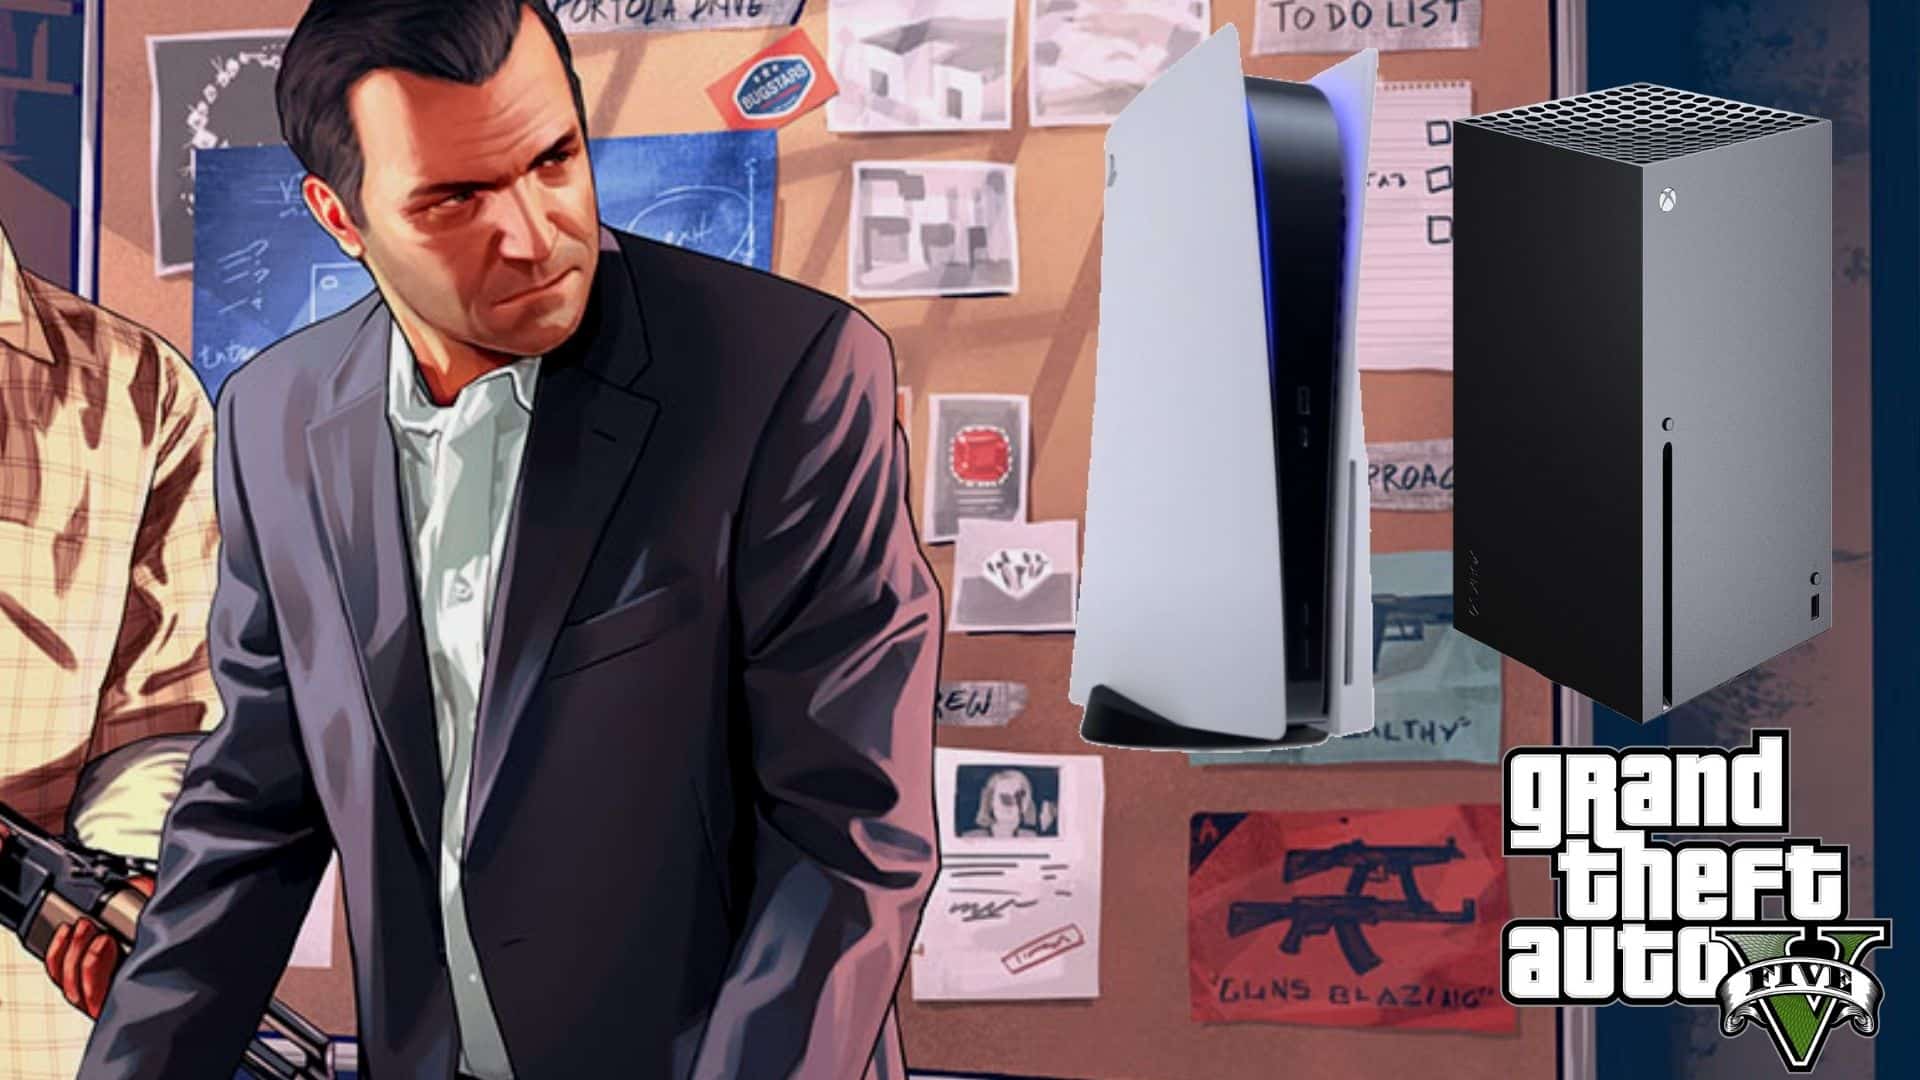 GTA 5 for PS5 and Xbox Series X is more complicated that it needs to be